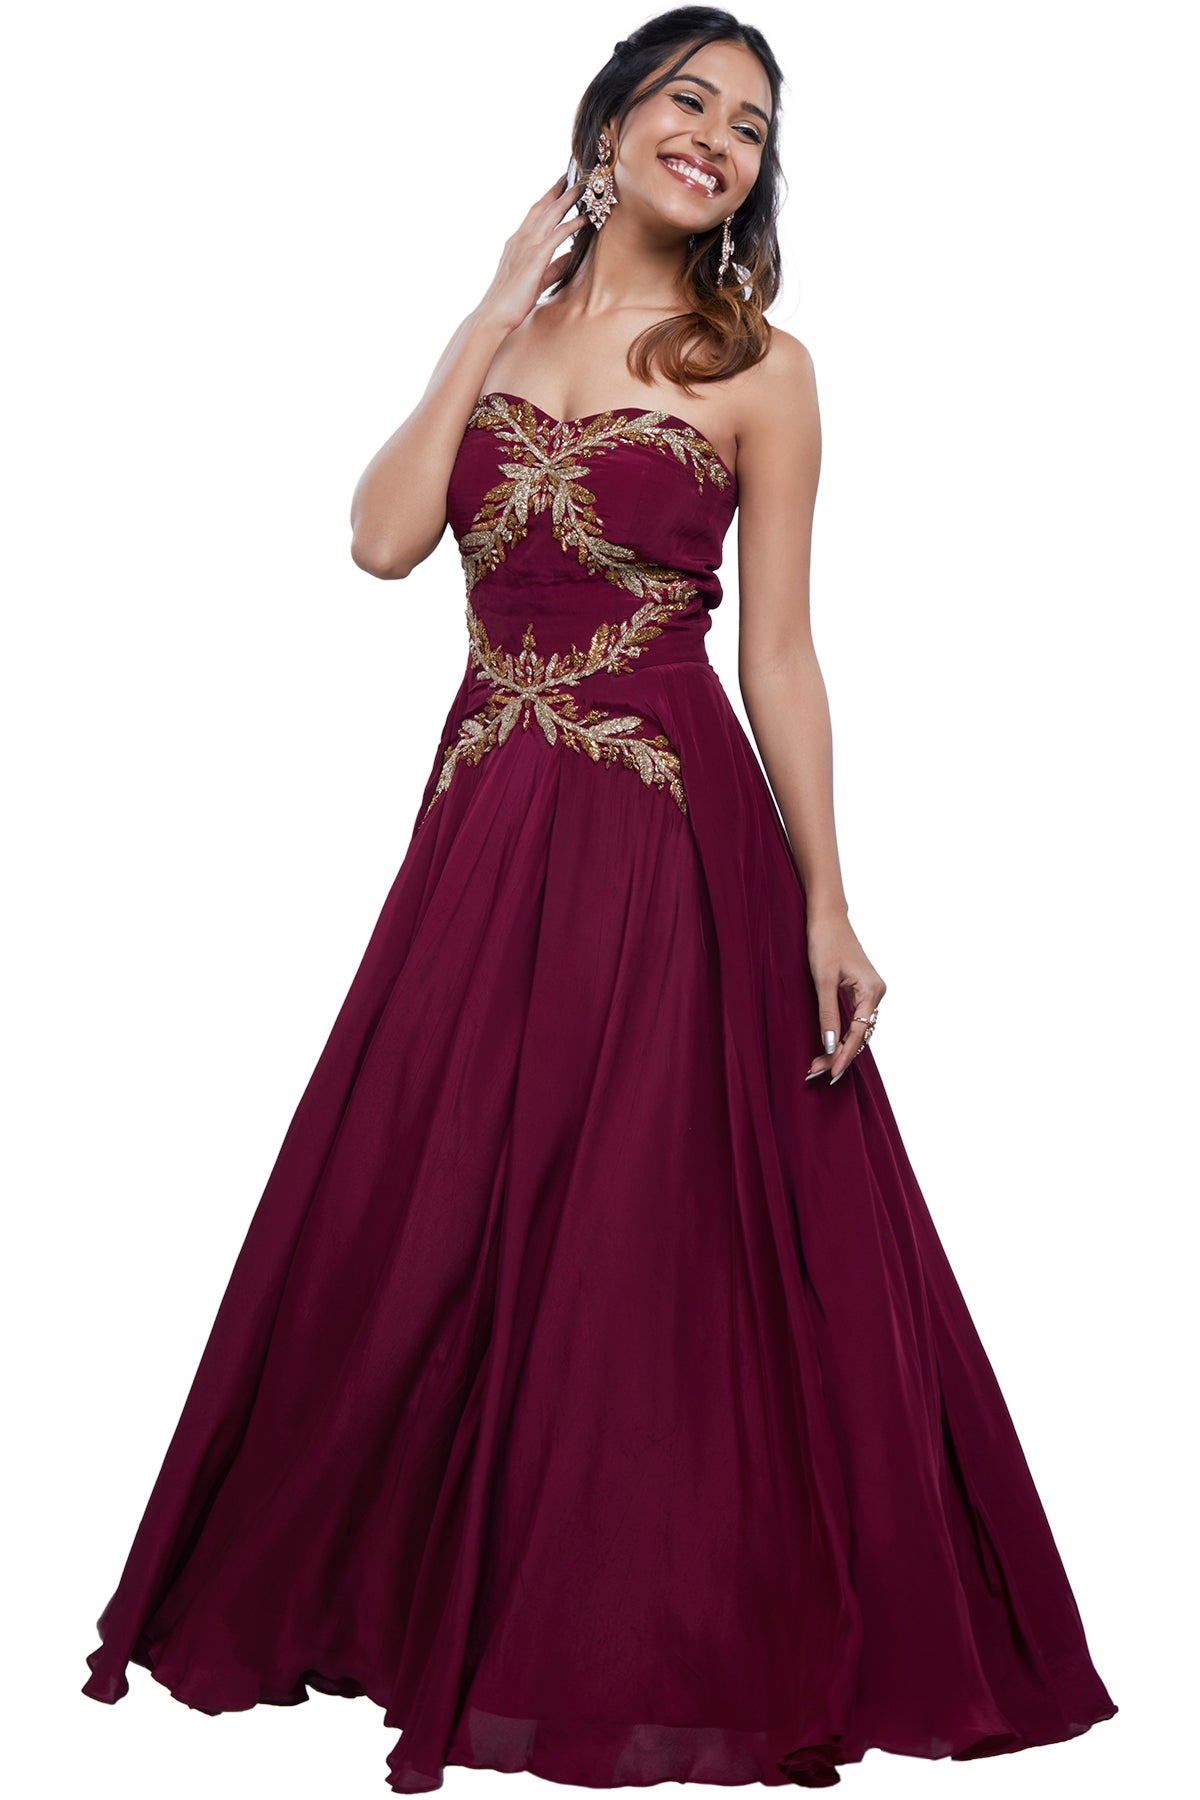 Rage through the night with this strapless maroon gown in satin silk with pita and zardosi work.